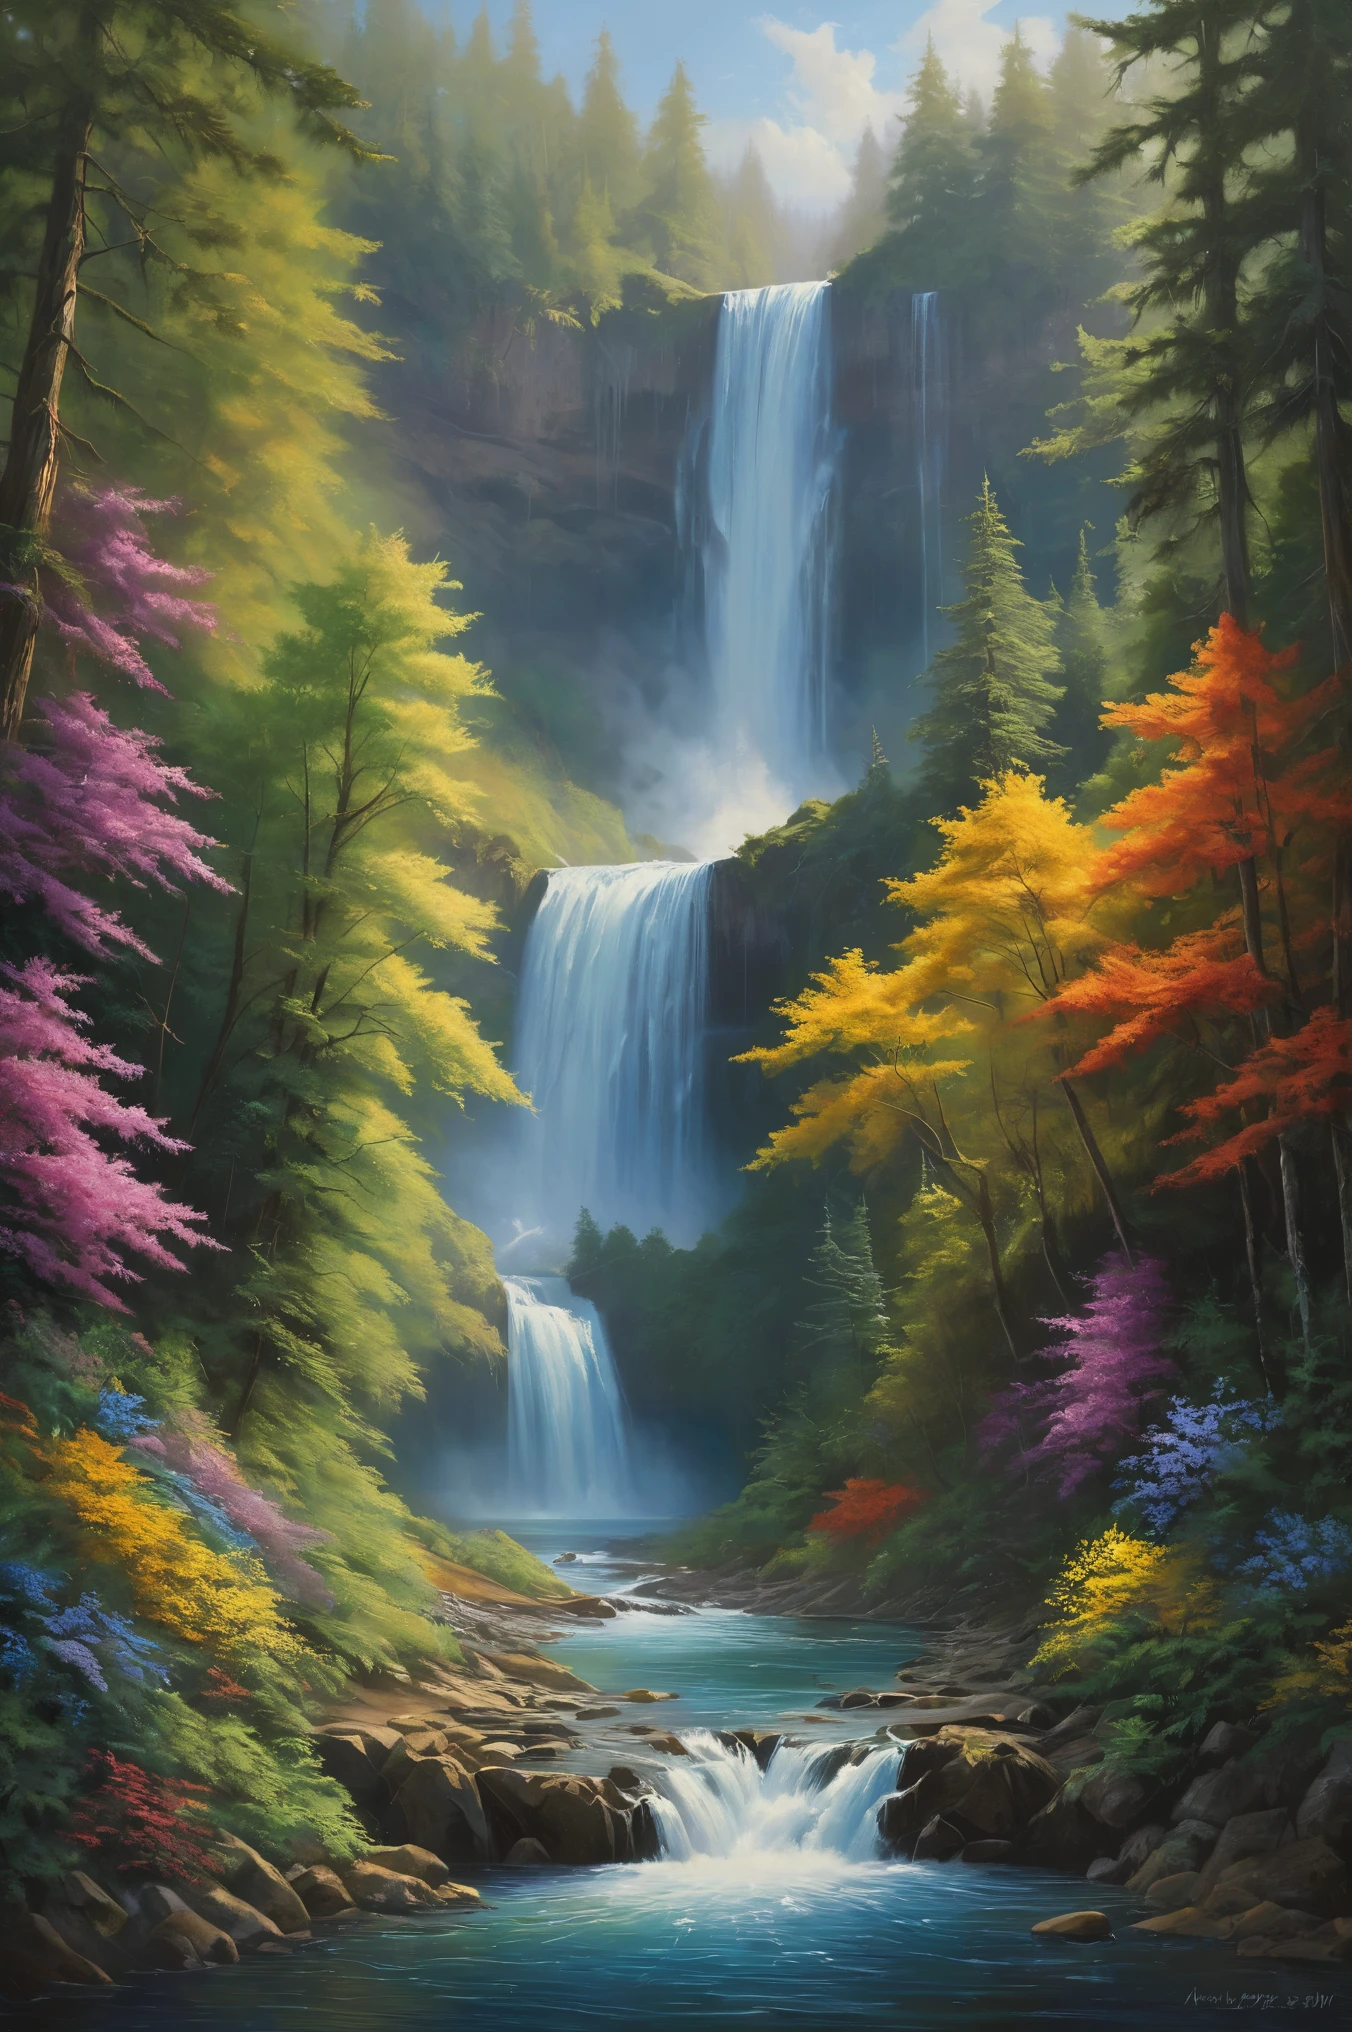 painting of a cascada in a forest with a river running through it, an endless cascada, multiple cascadas, cascadas, with trees and cascadas, floating cascadas, (cascada), with cascadas, por Michael James Smith, en cascada cascadas, flowers and cascadas, en cascada iridescent cascadas, cascada, several cascadas, high cascadas, en cascada, forest and cascada